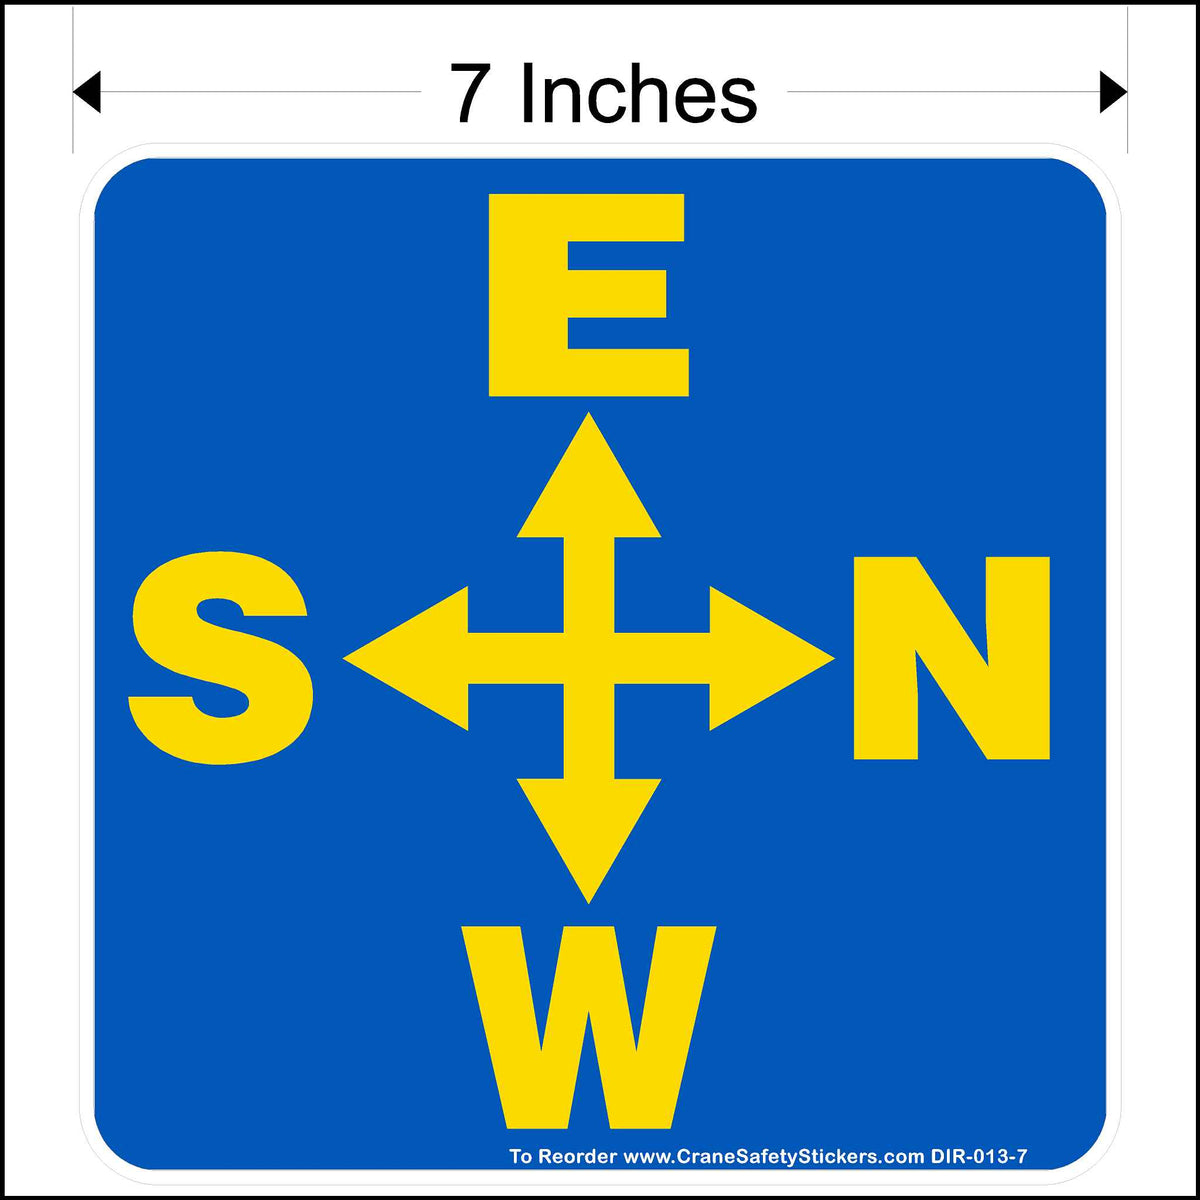 Overhead crane directional decal printed in blue and yellow measuring 7 inches square.